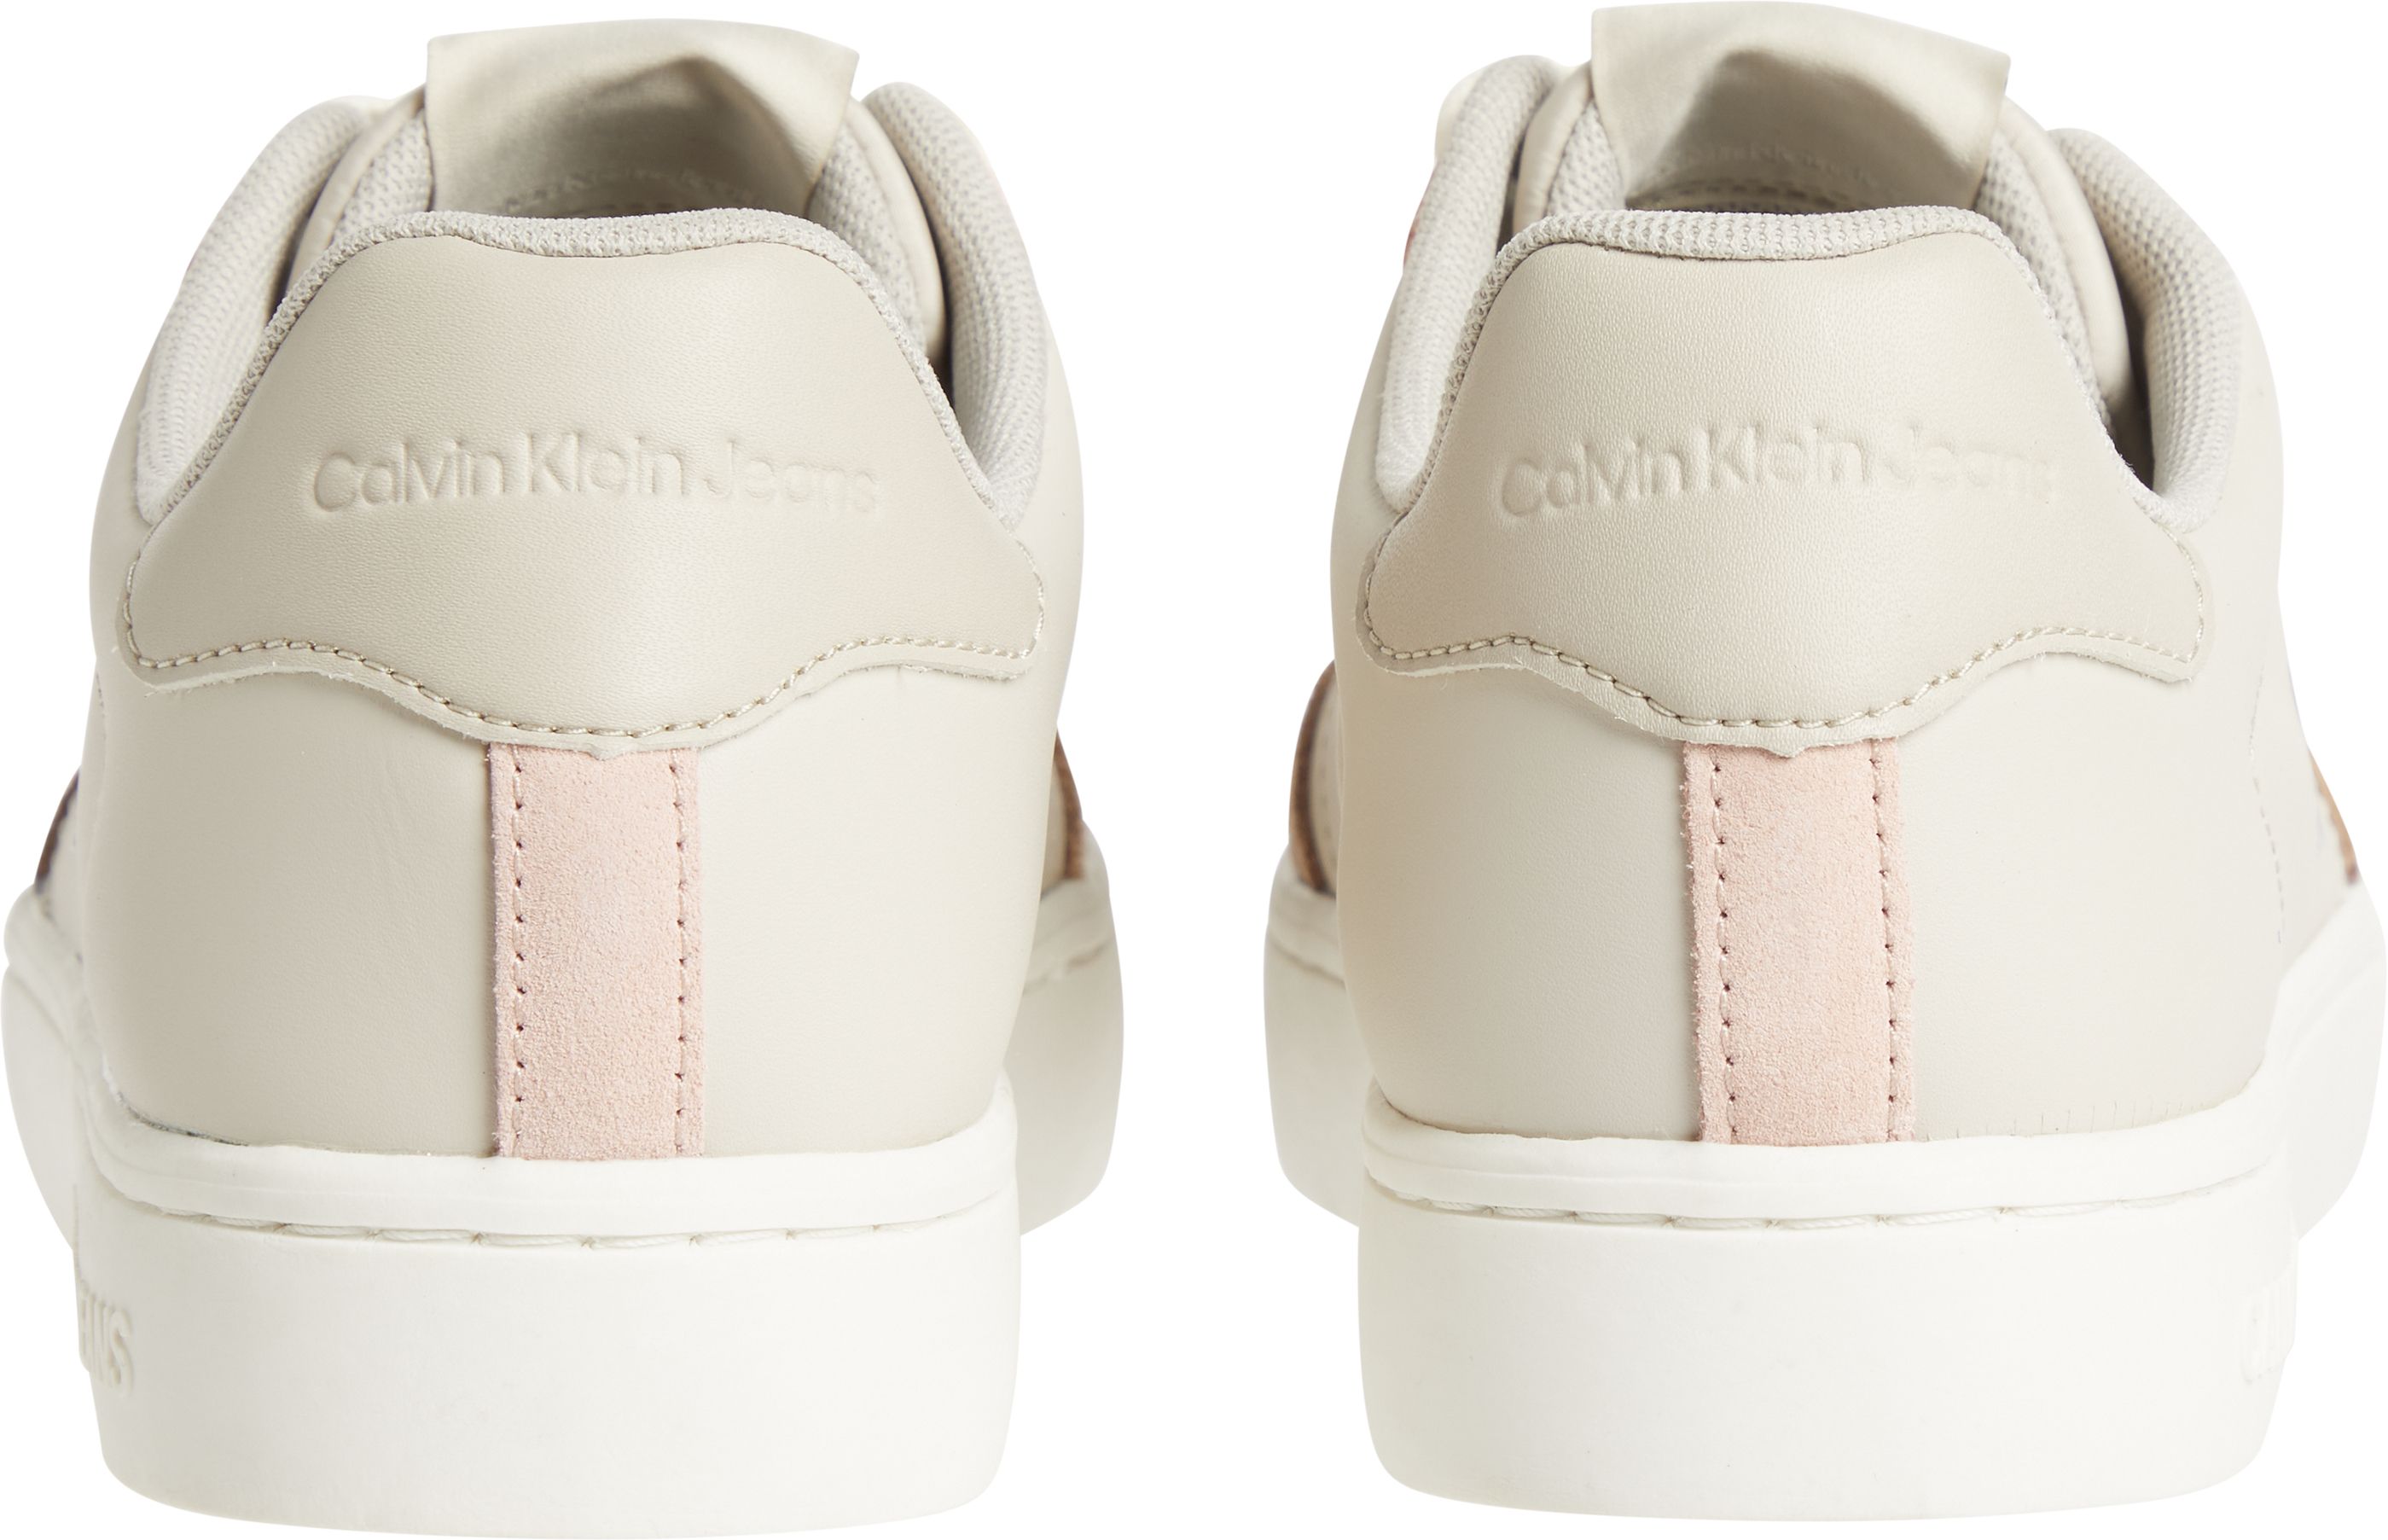 Calvin Klein Jeans Classic Cupsole Lace Up Sneakers